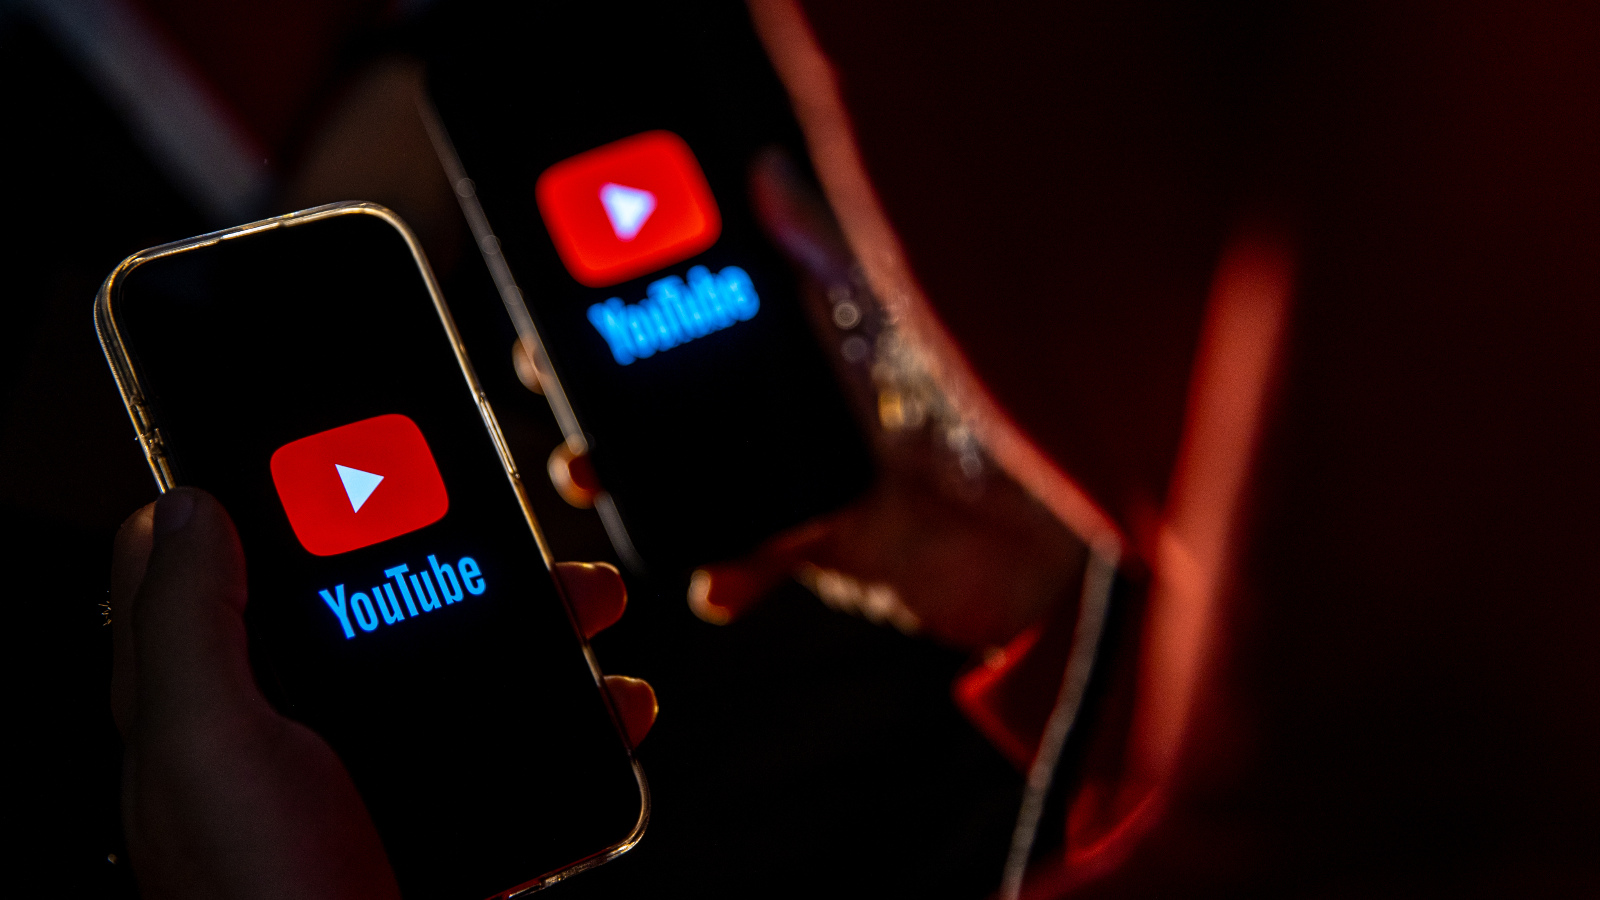 A photo illustration of the YouTube logo on mobile phone screens with a dark, ominous background.